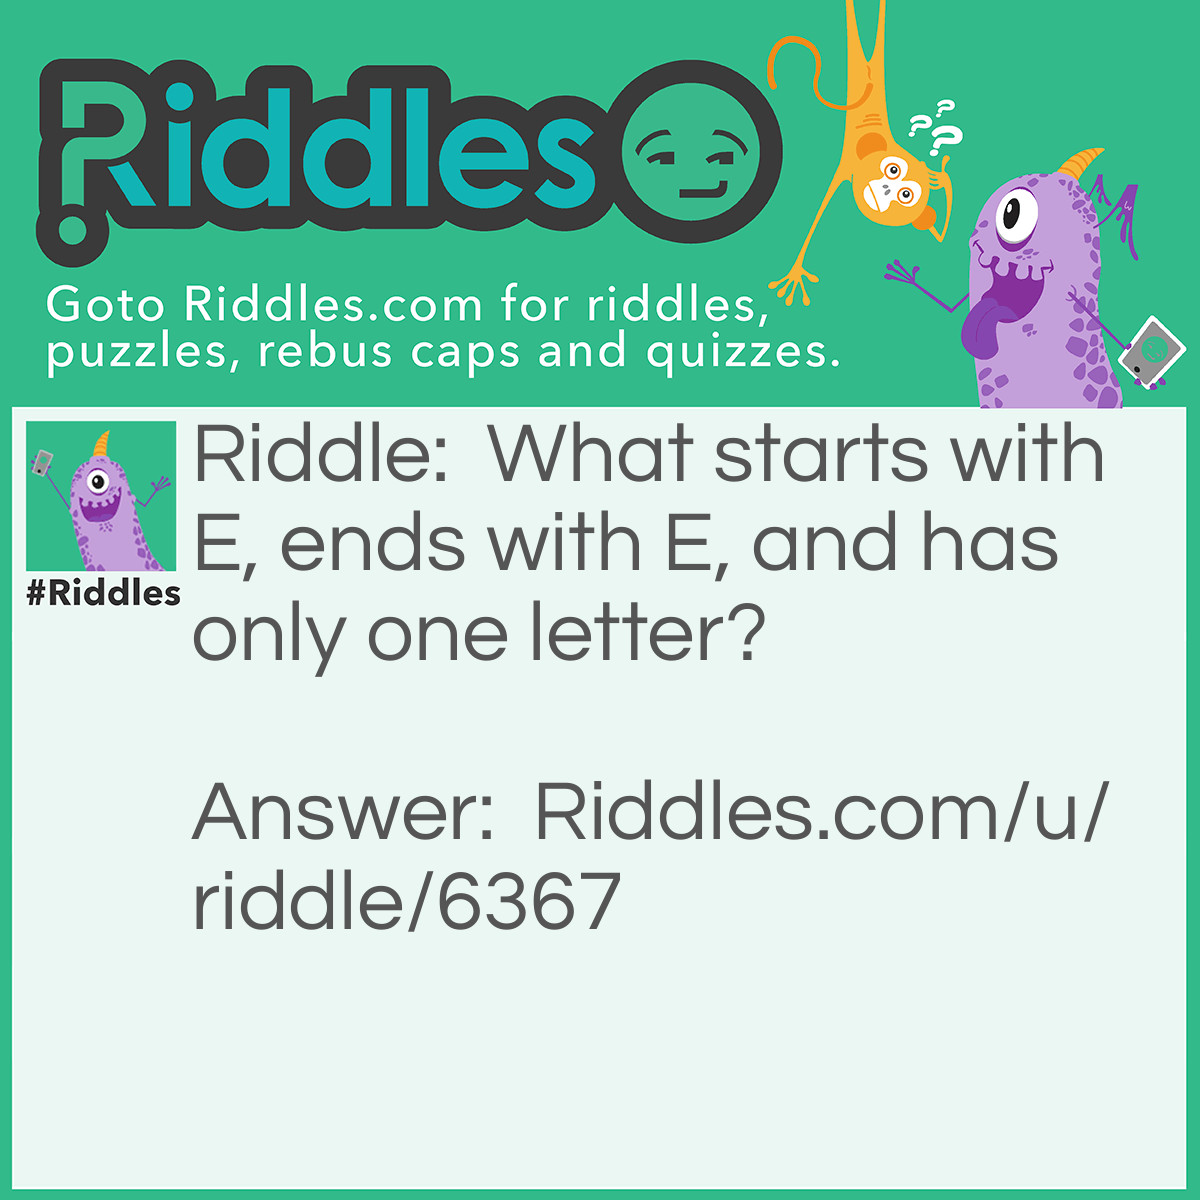 Riddle: What starts with E, ends with E, and has only one letter? Answer: An envelope! Starts and ends with e. Carries one letter to send.